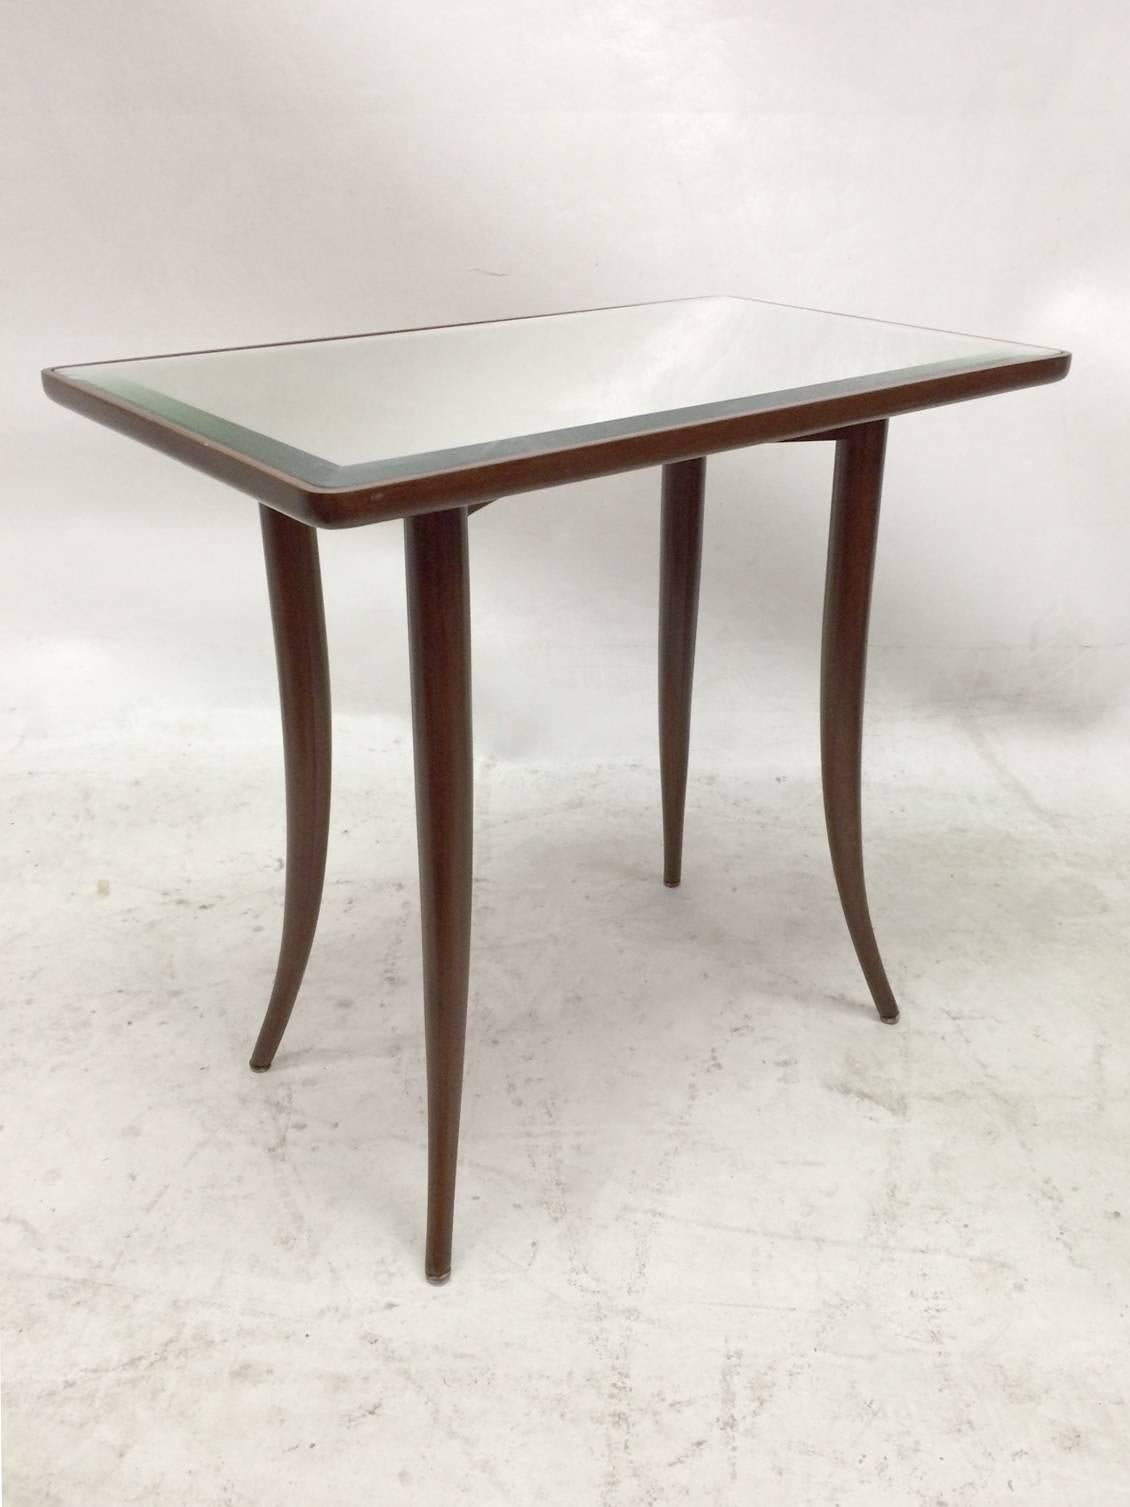 This is a stunning pair of side tables with klismos legs and mirrored tops. The tables have bent-wood mahogany legs and a recessed top for the mirrors.